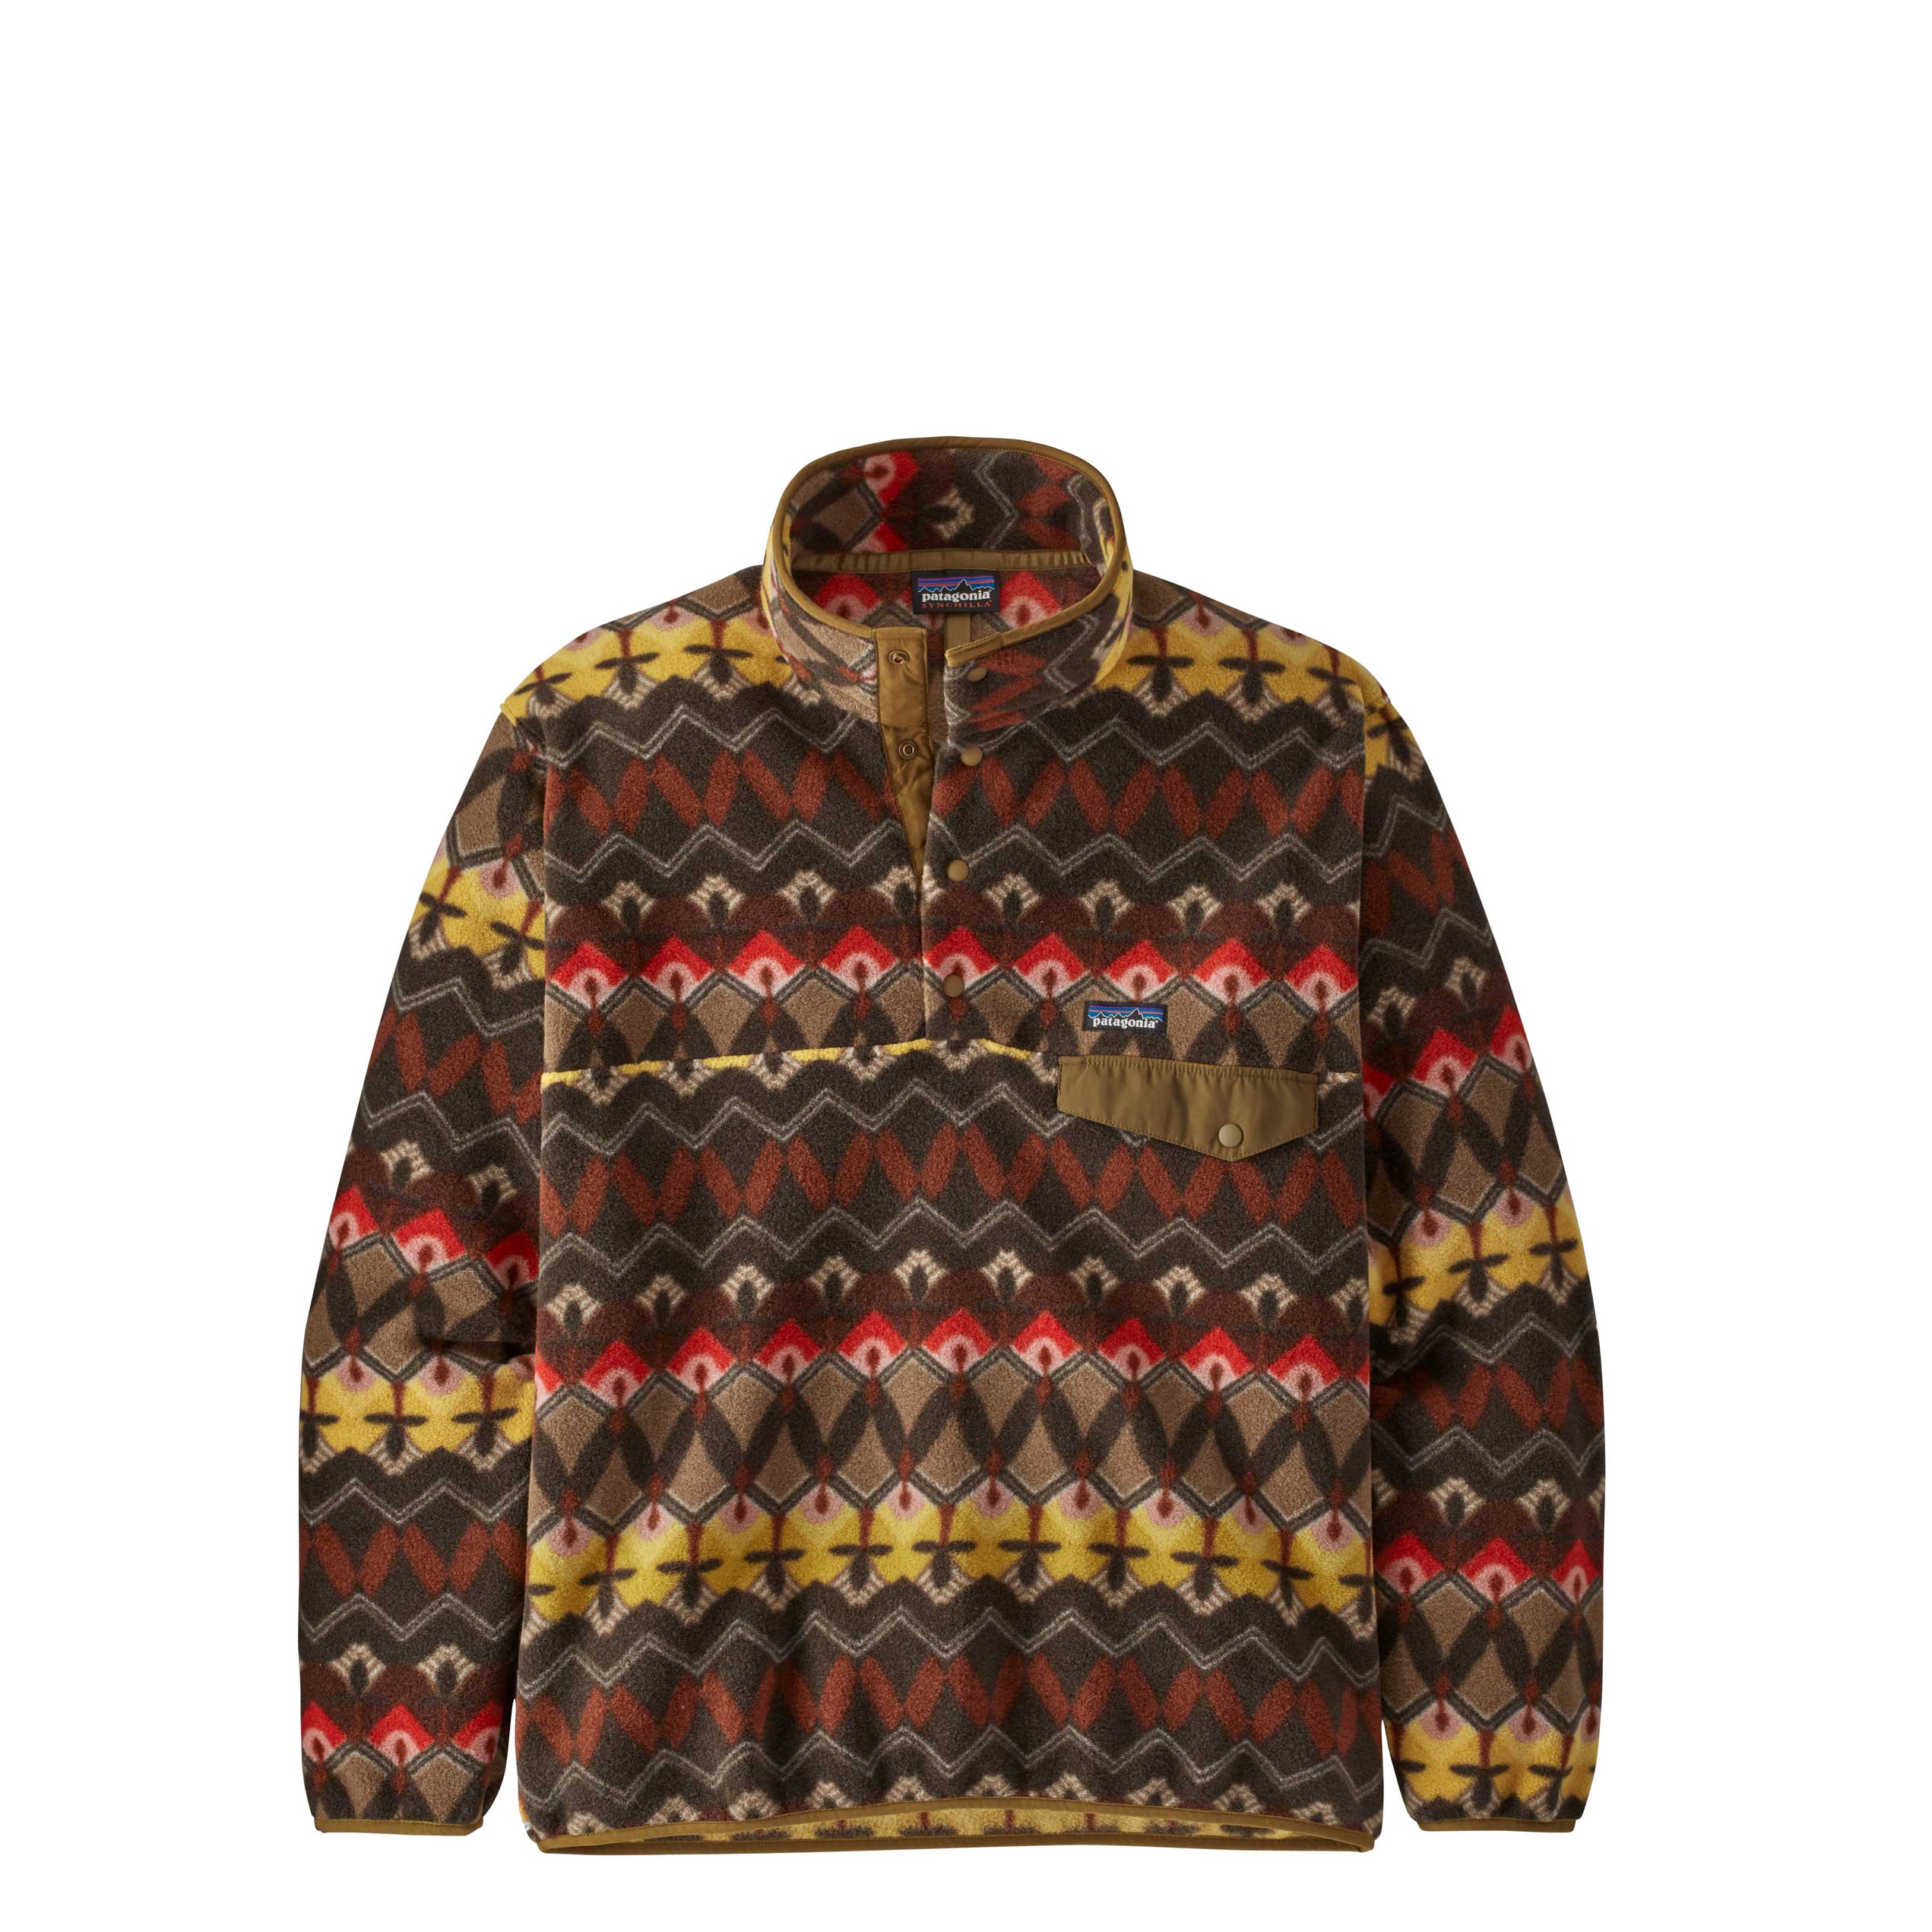 Men's Fleece Pullovers by Patagonia